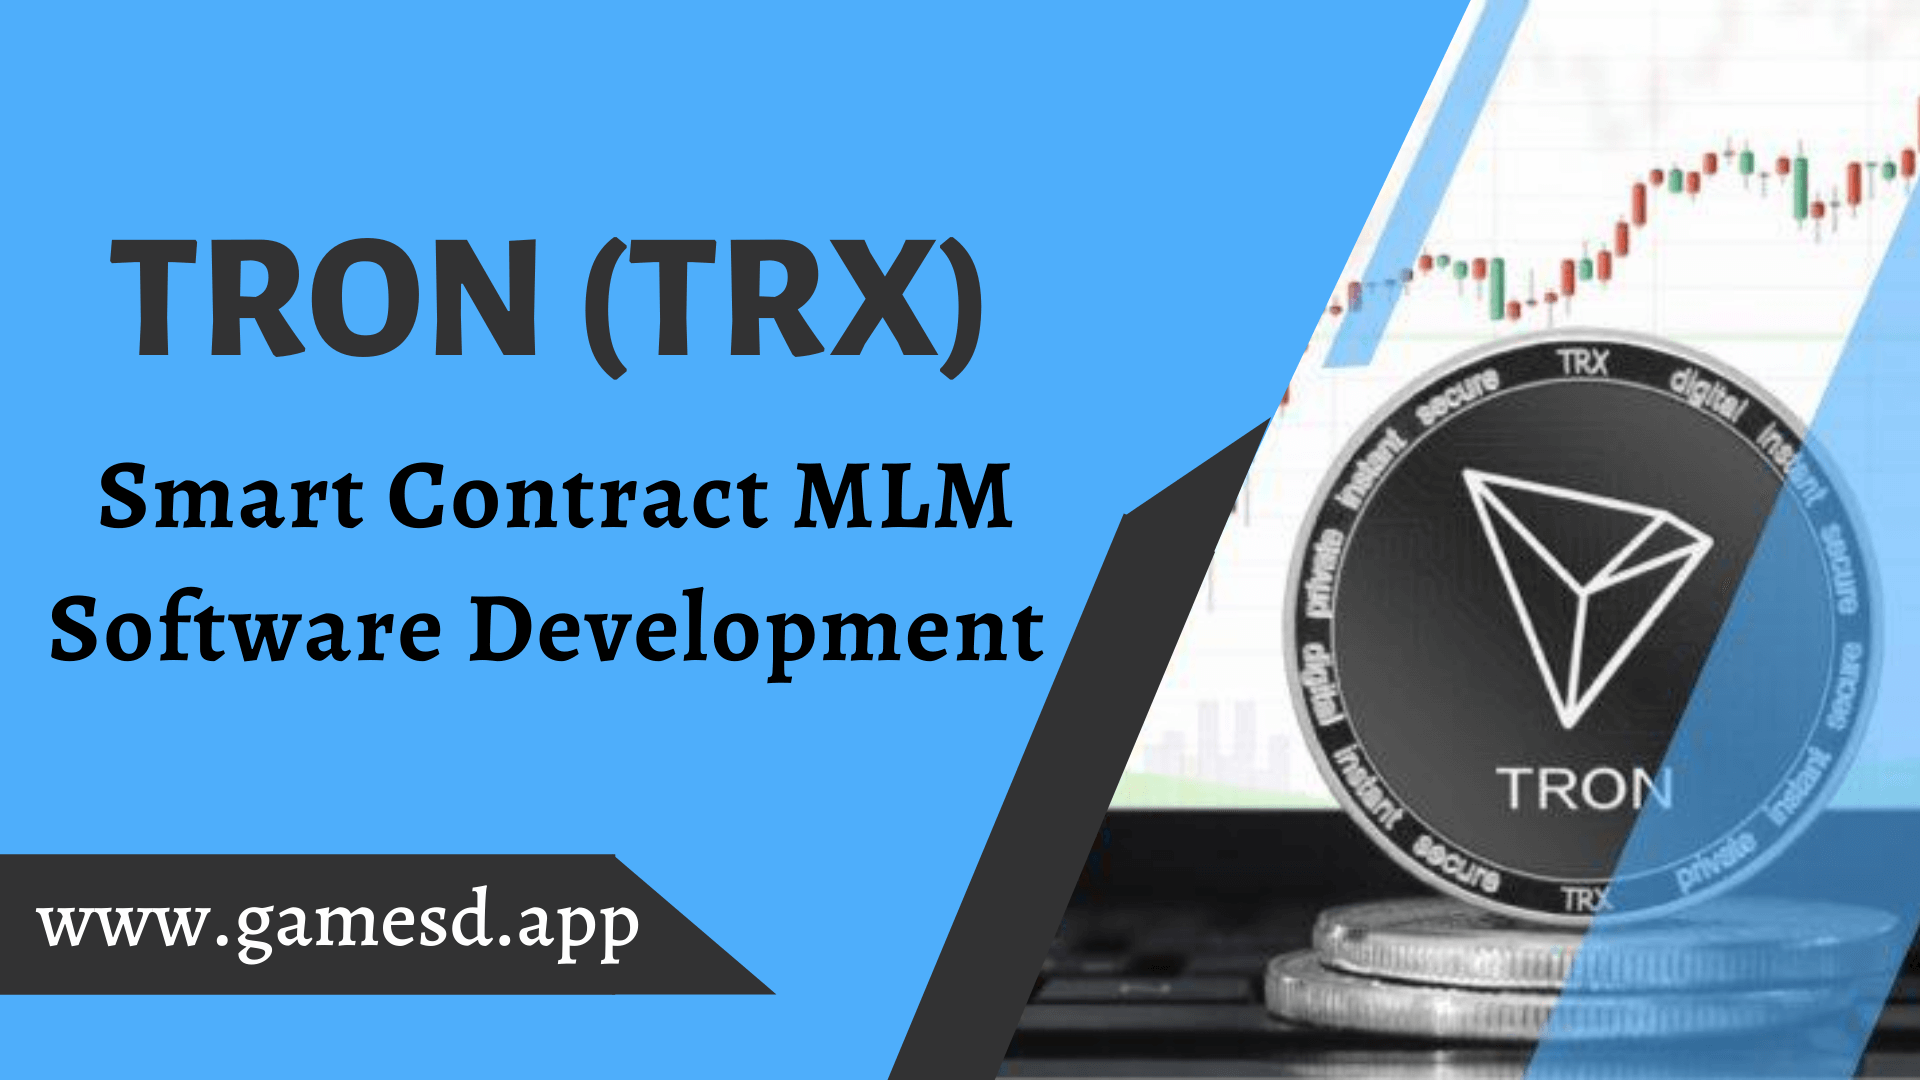 TRON Smart Contract MLM Software to Build Decentralized Smart Contract MLM Business on Tron blockchain